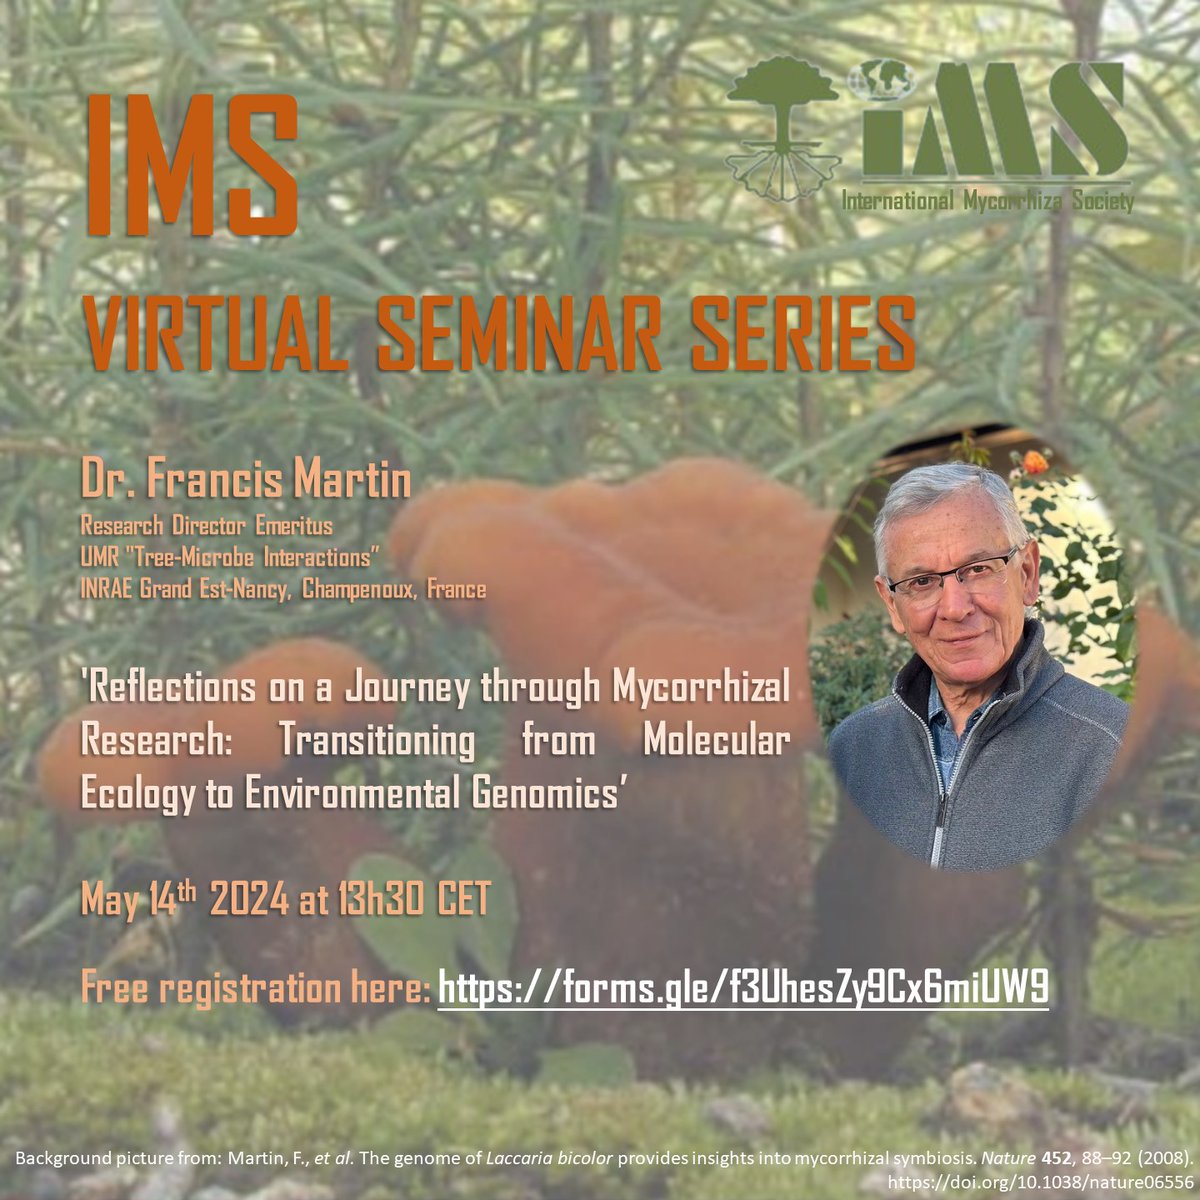 📣Great News: IMS Virtual Seminar! It is with great joy that we would like to cordially invite you to the new IMS virtual seminar that will start with our first eminent speaker Dr. Francis Martin @fmartin1954 📍May 14th 2024 13h30 CET Free registration👇 forms.gle/f3UhesZy9Cx6mi…